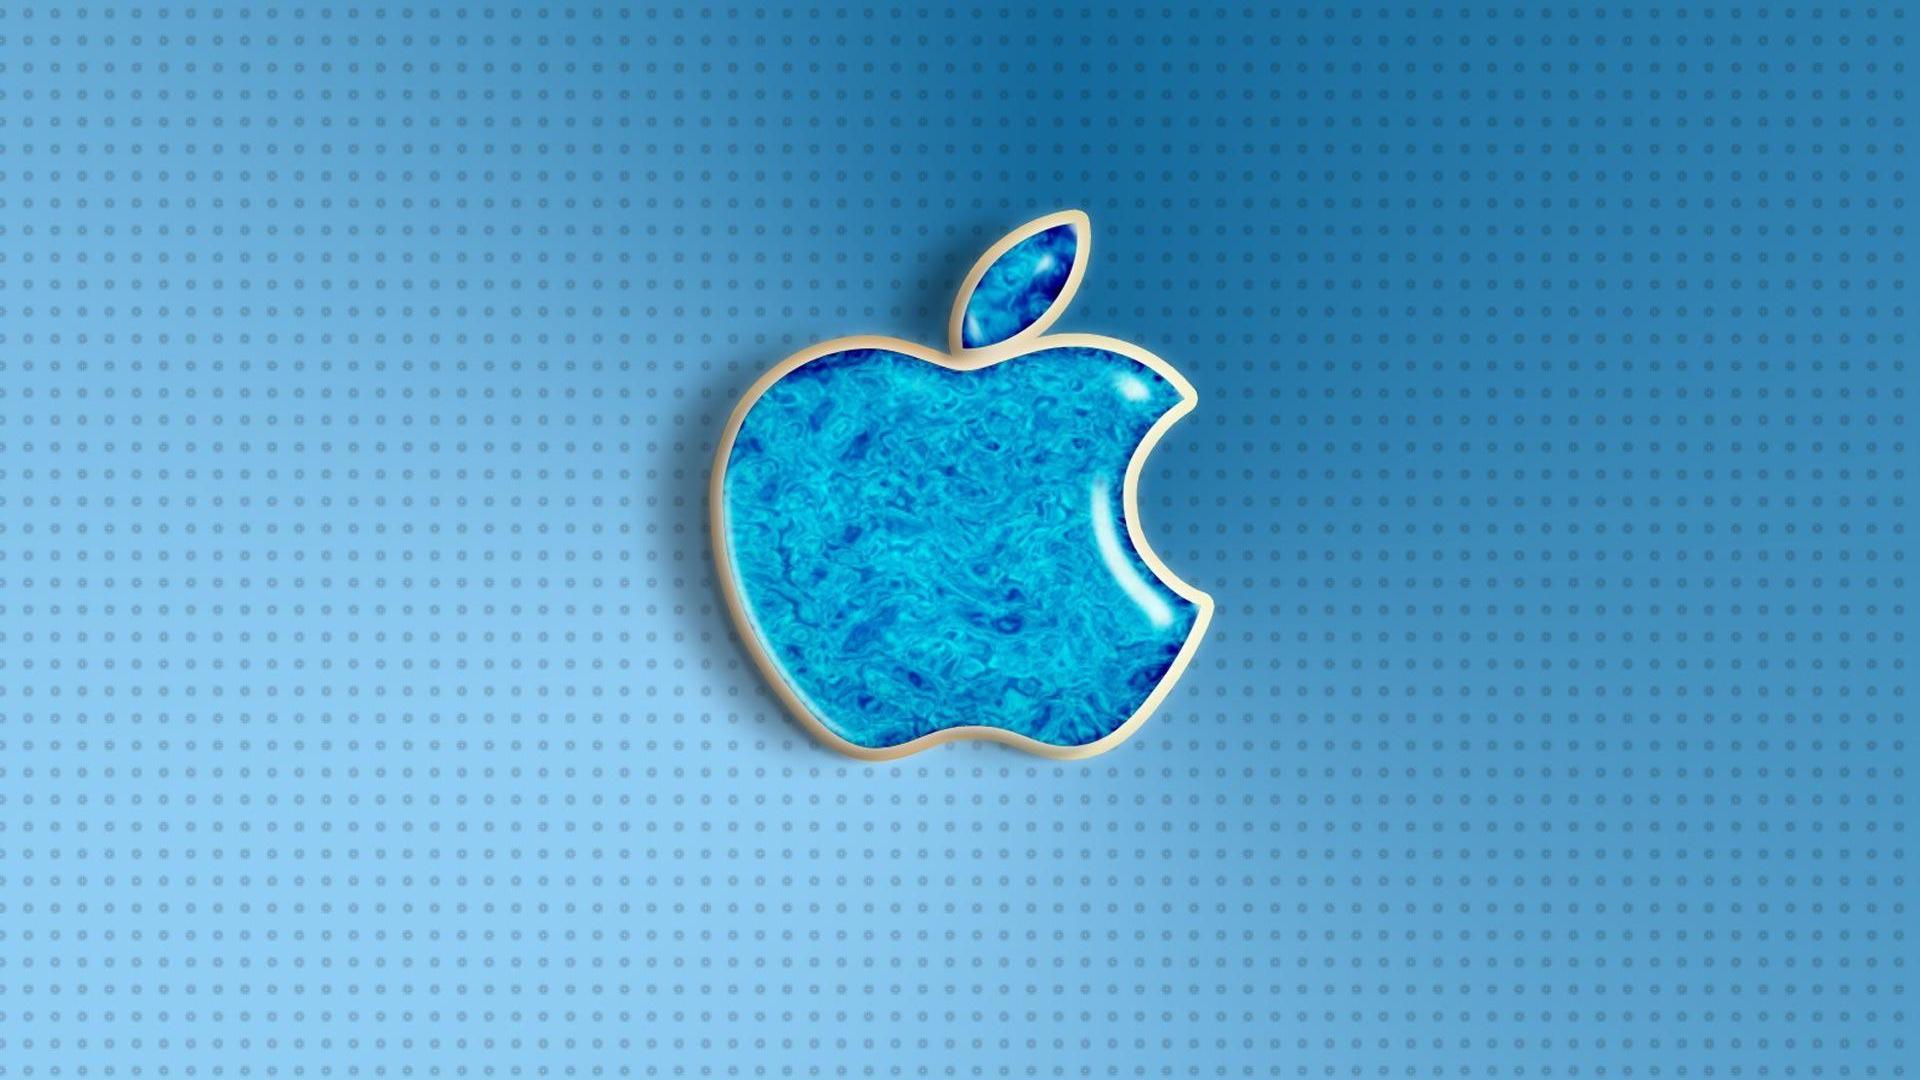 Wallpapers Apple Blue  Wallpaper Cave